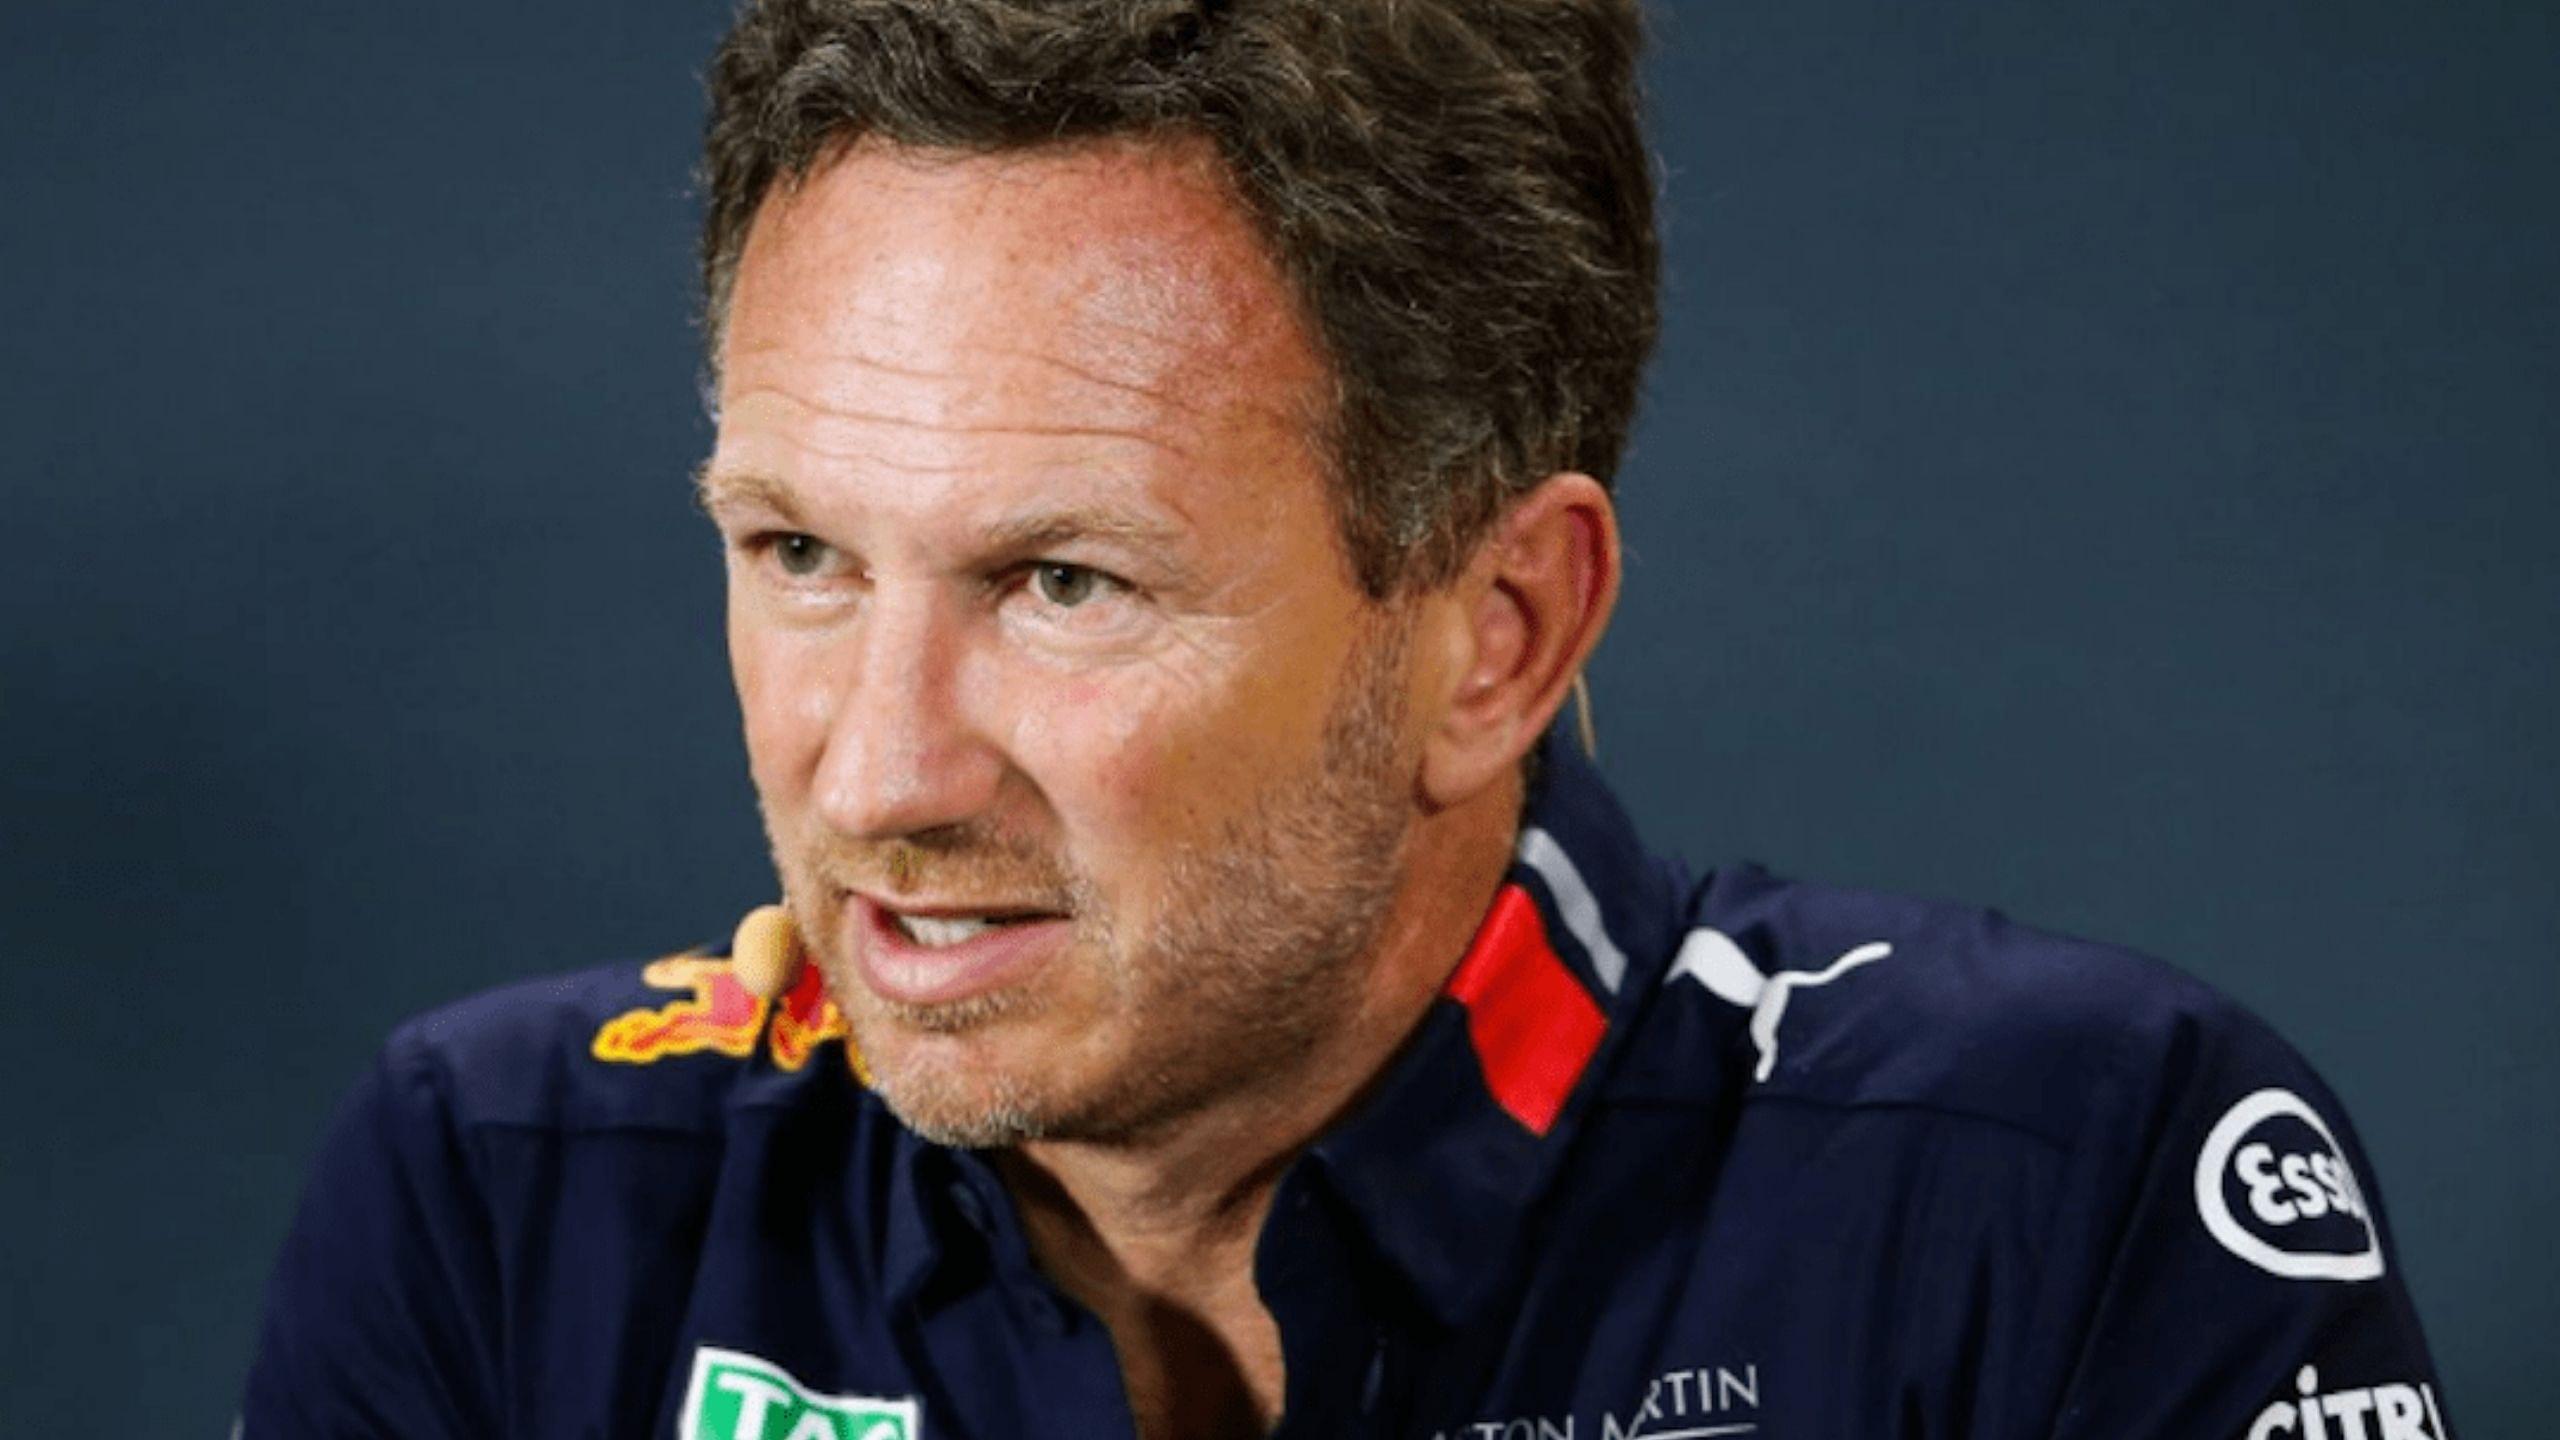 F1 Drivers' Salary Cap: Red Bull boss Christian Horner fears the drivers' salary cap regulation could get entangled legally